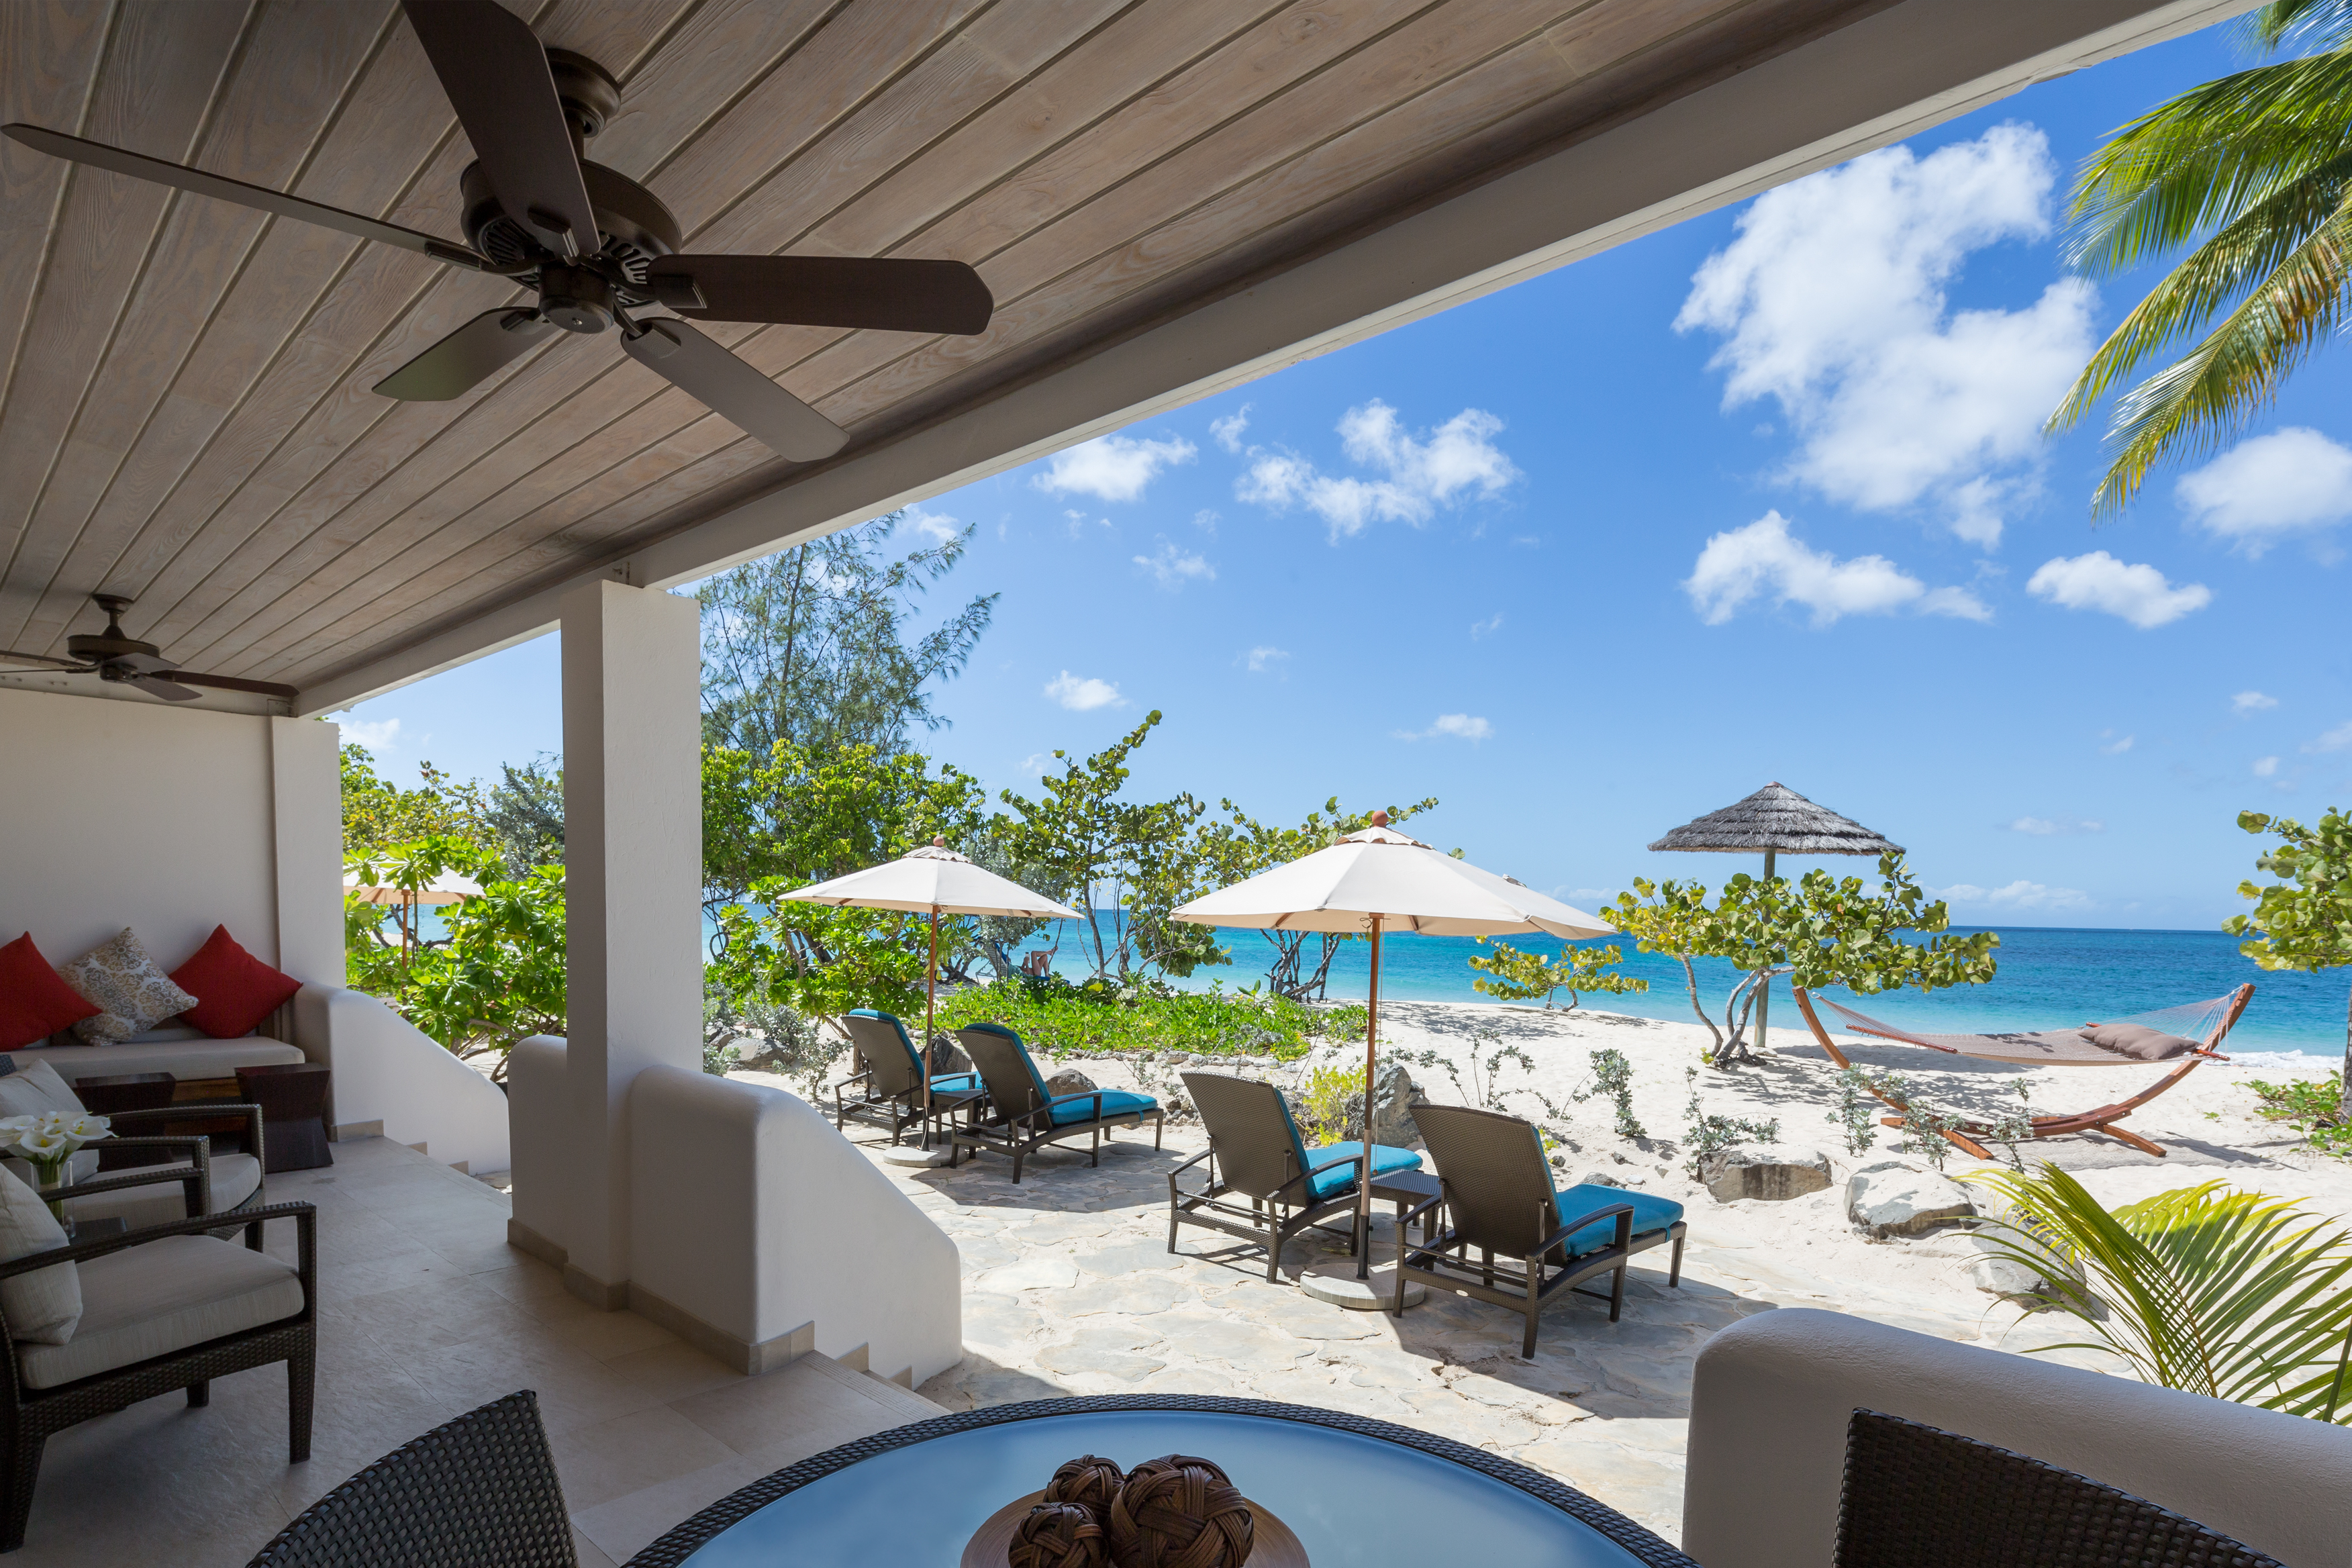 Luxury Suites in the Caribbean | Spice Island Resort